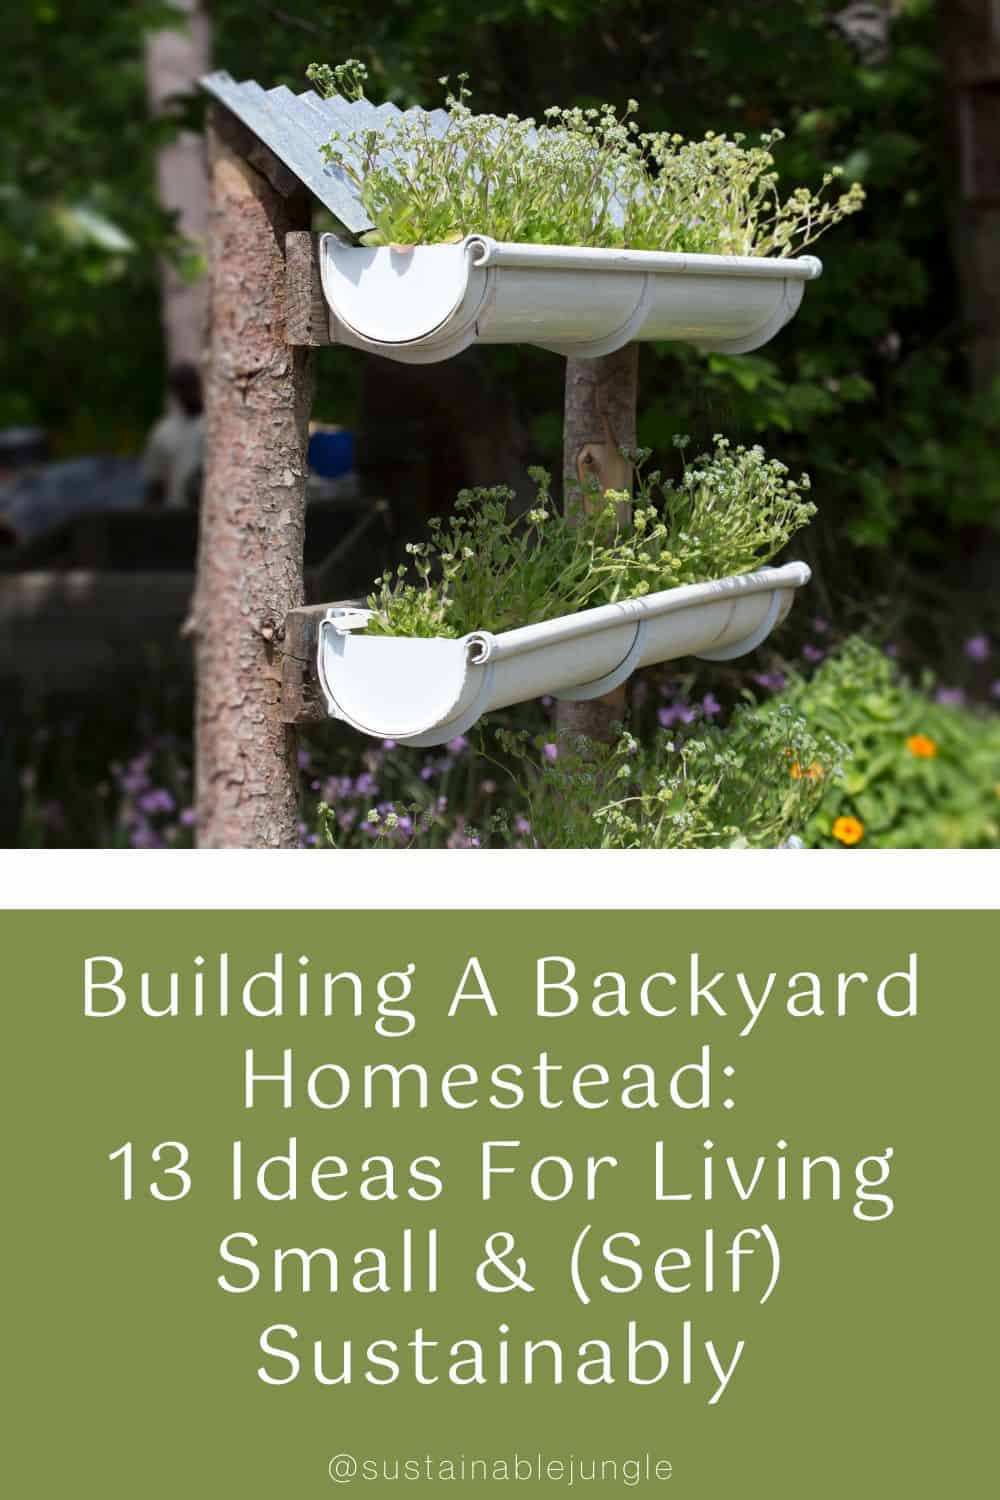 Building A Backyard Homestead: 13 Ideas For Living Small & (Self) Sustainably Image by cookedphotos #backyardhomestead #backyardhomesteading #backyardhomesteadudeas #smallhomesteadgardenideas #smallhomesteading #sustainablejungle